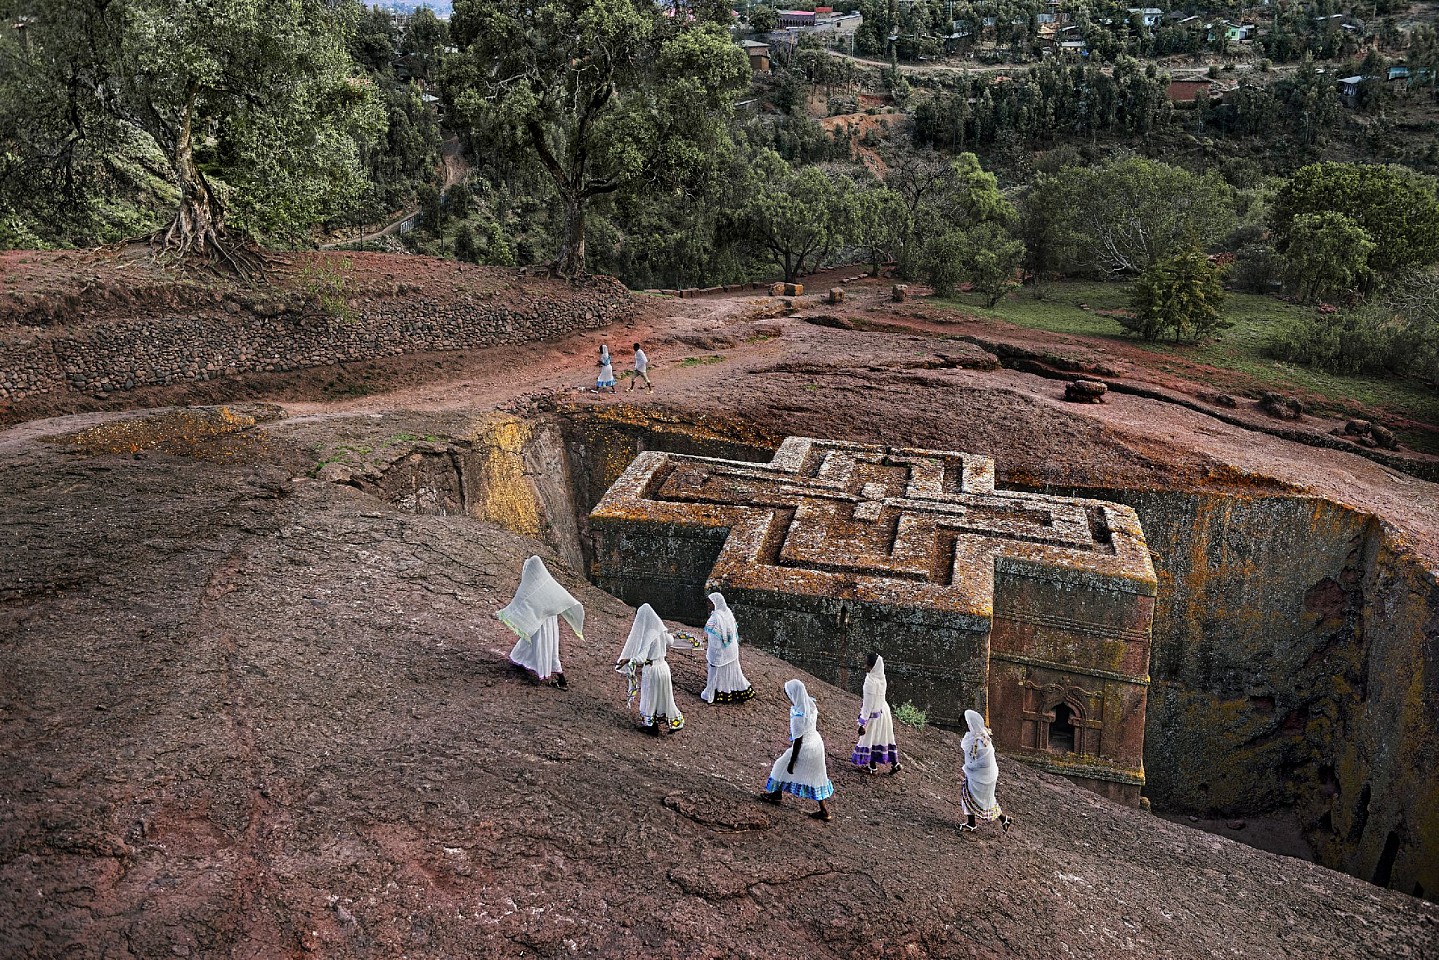 Steve McCurry, Monolithic Church in Lalibela, 2016
FujiFlex Crystal Archive Print
Price/Size on request